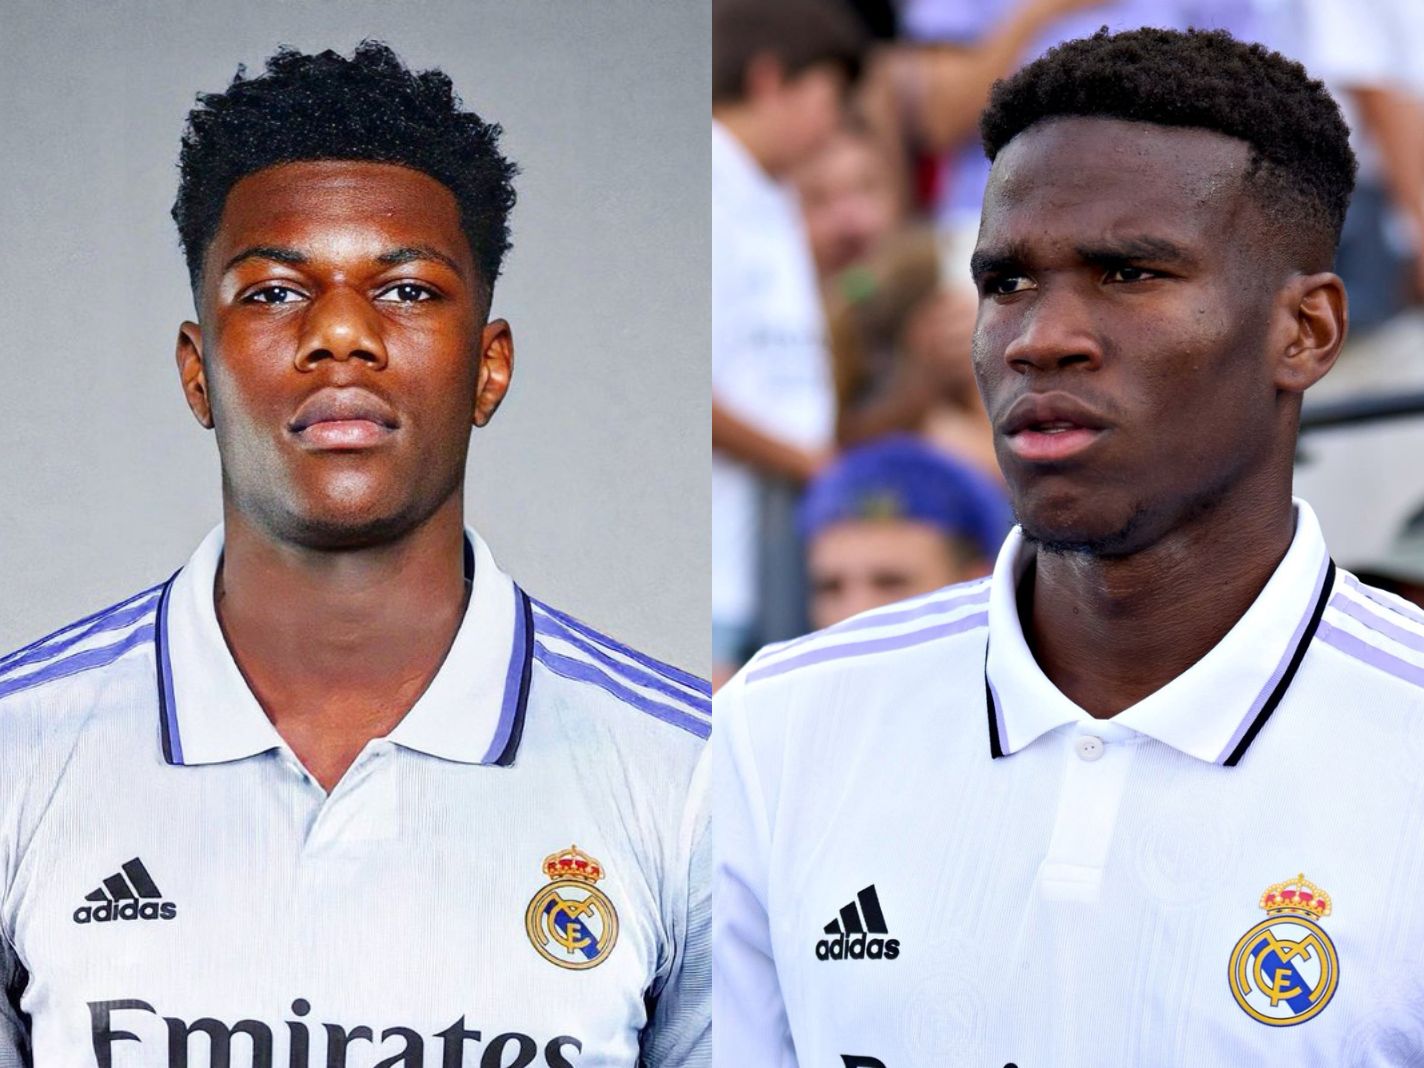 Who is Marvel? The In-house Aurelien Tchouameni Lookalike at Real Madrid